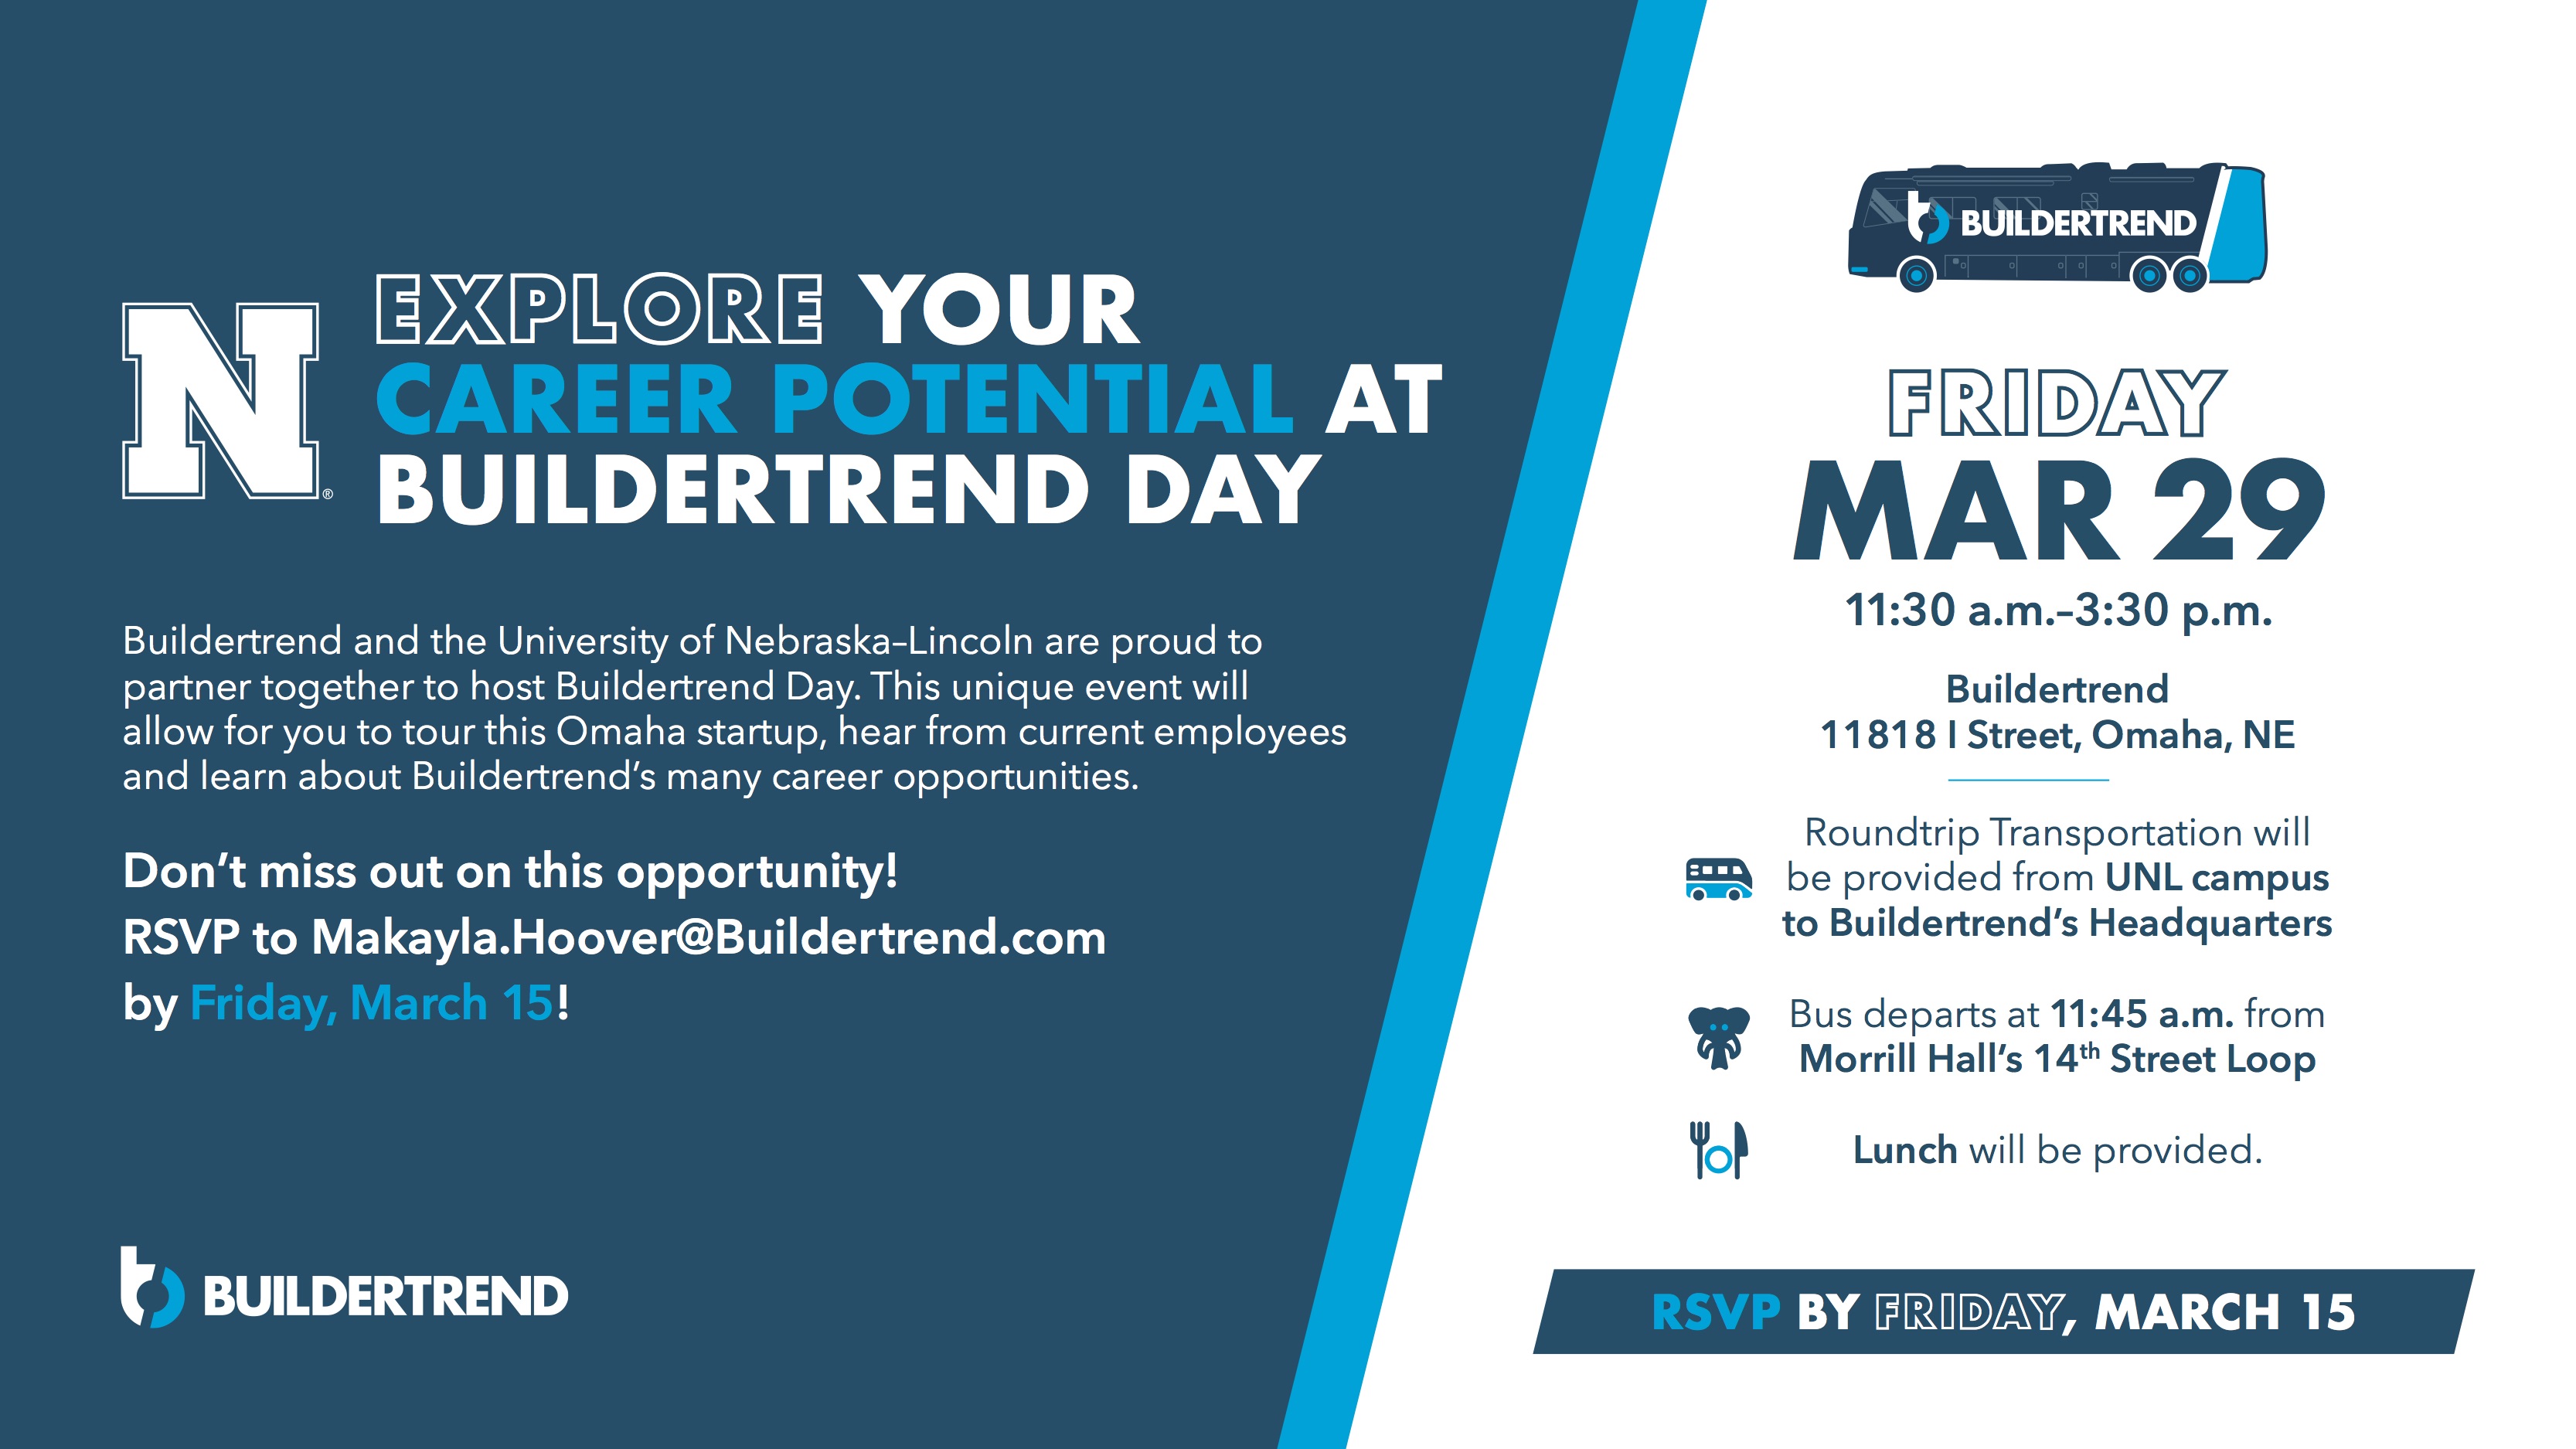 Buildertrend invites CSE students to attend a special career event at the company's Omaha office on Friday, March 29. 